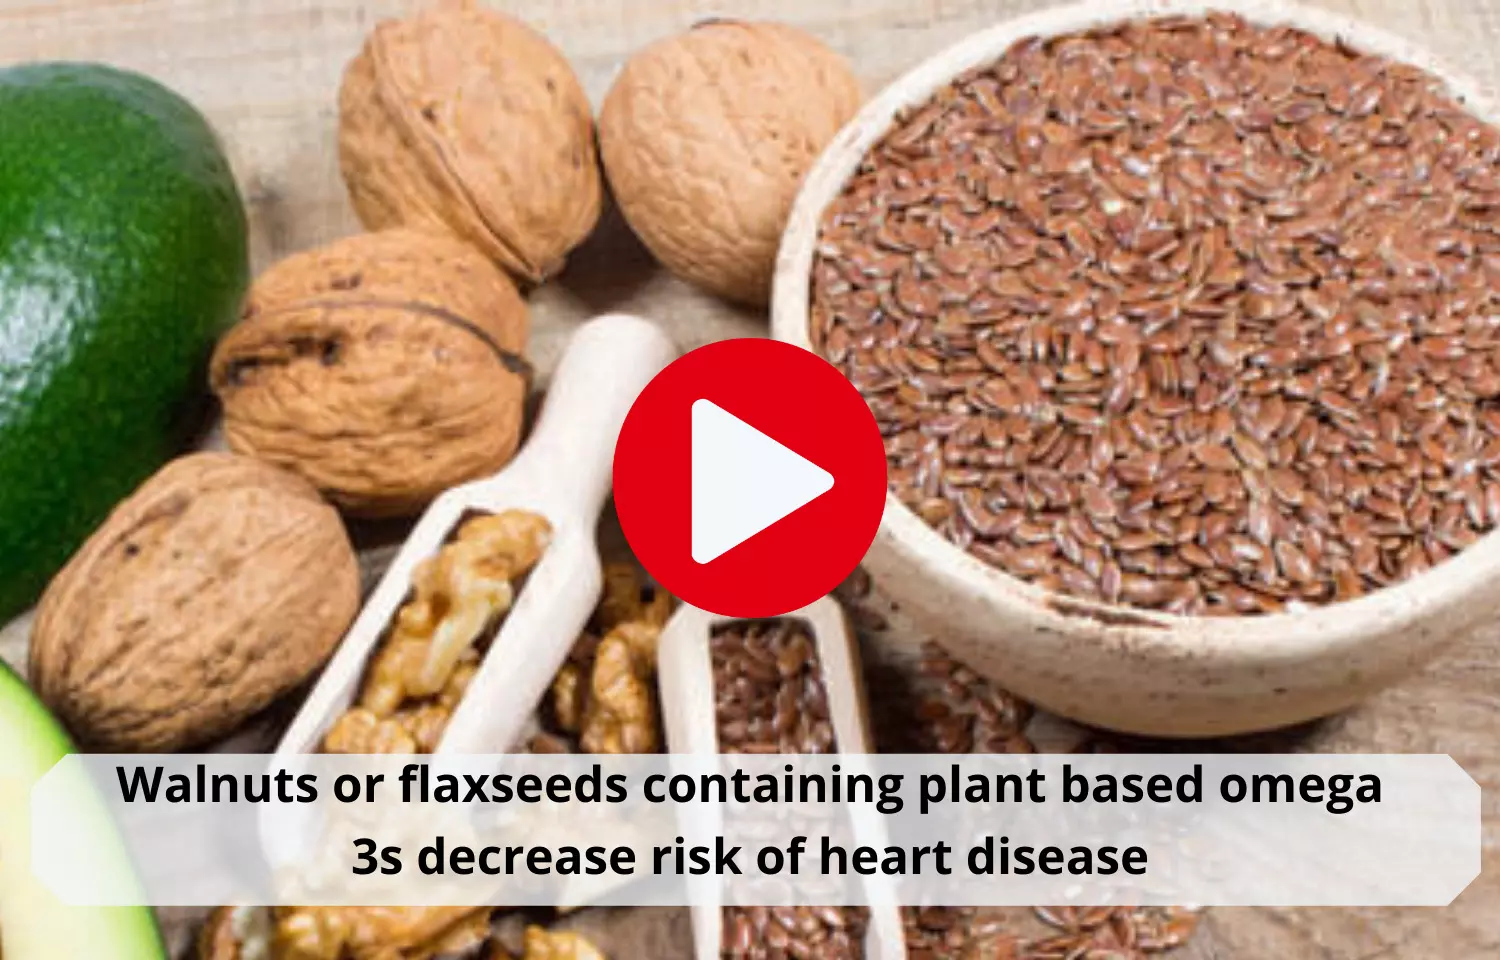 Walnuts or flaxseeds with plant based omega 3s decrease risk of heart disease